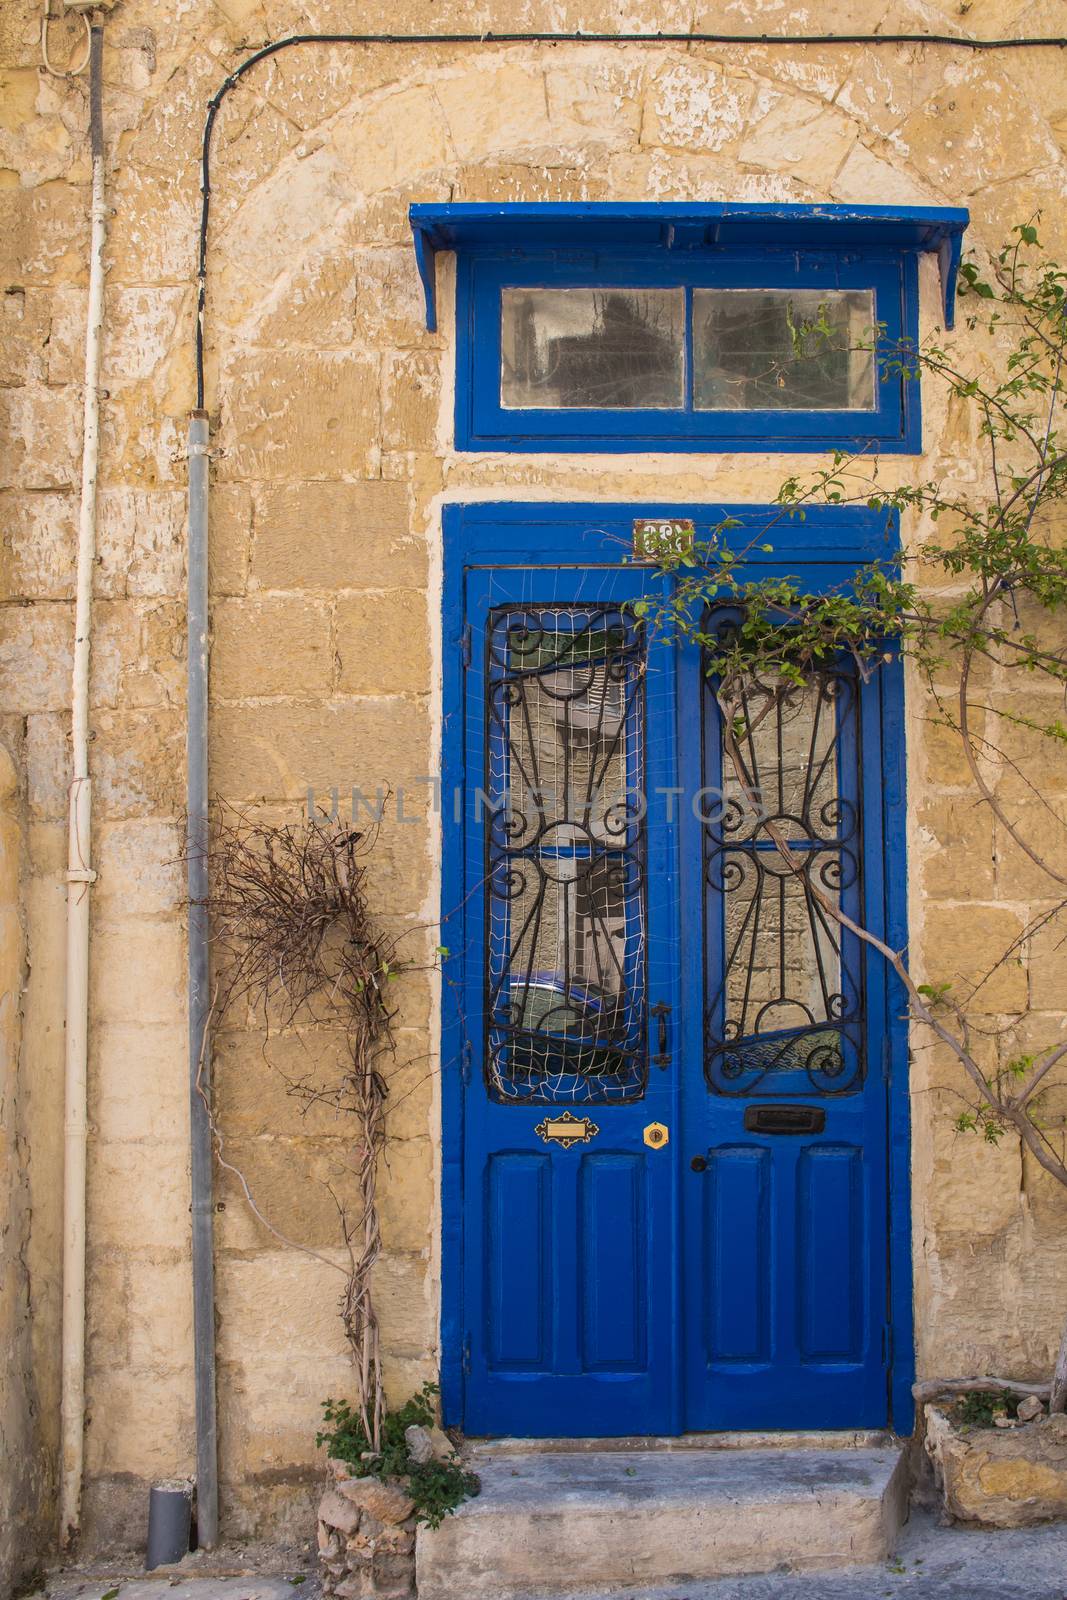 Wall of a stone building in the capital of Malta - Valletta. Bright blue wooden gate with two glasses with a reflection.